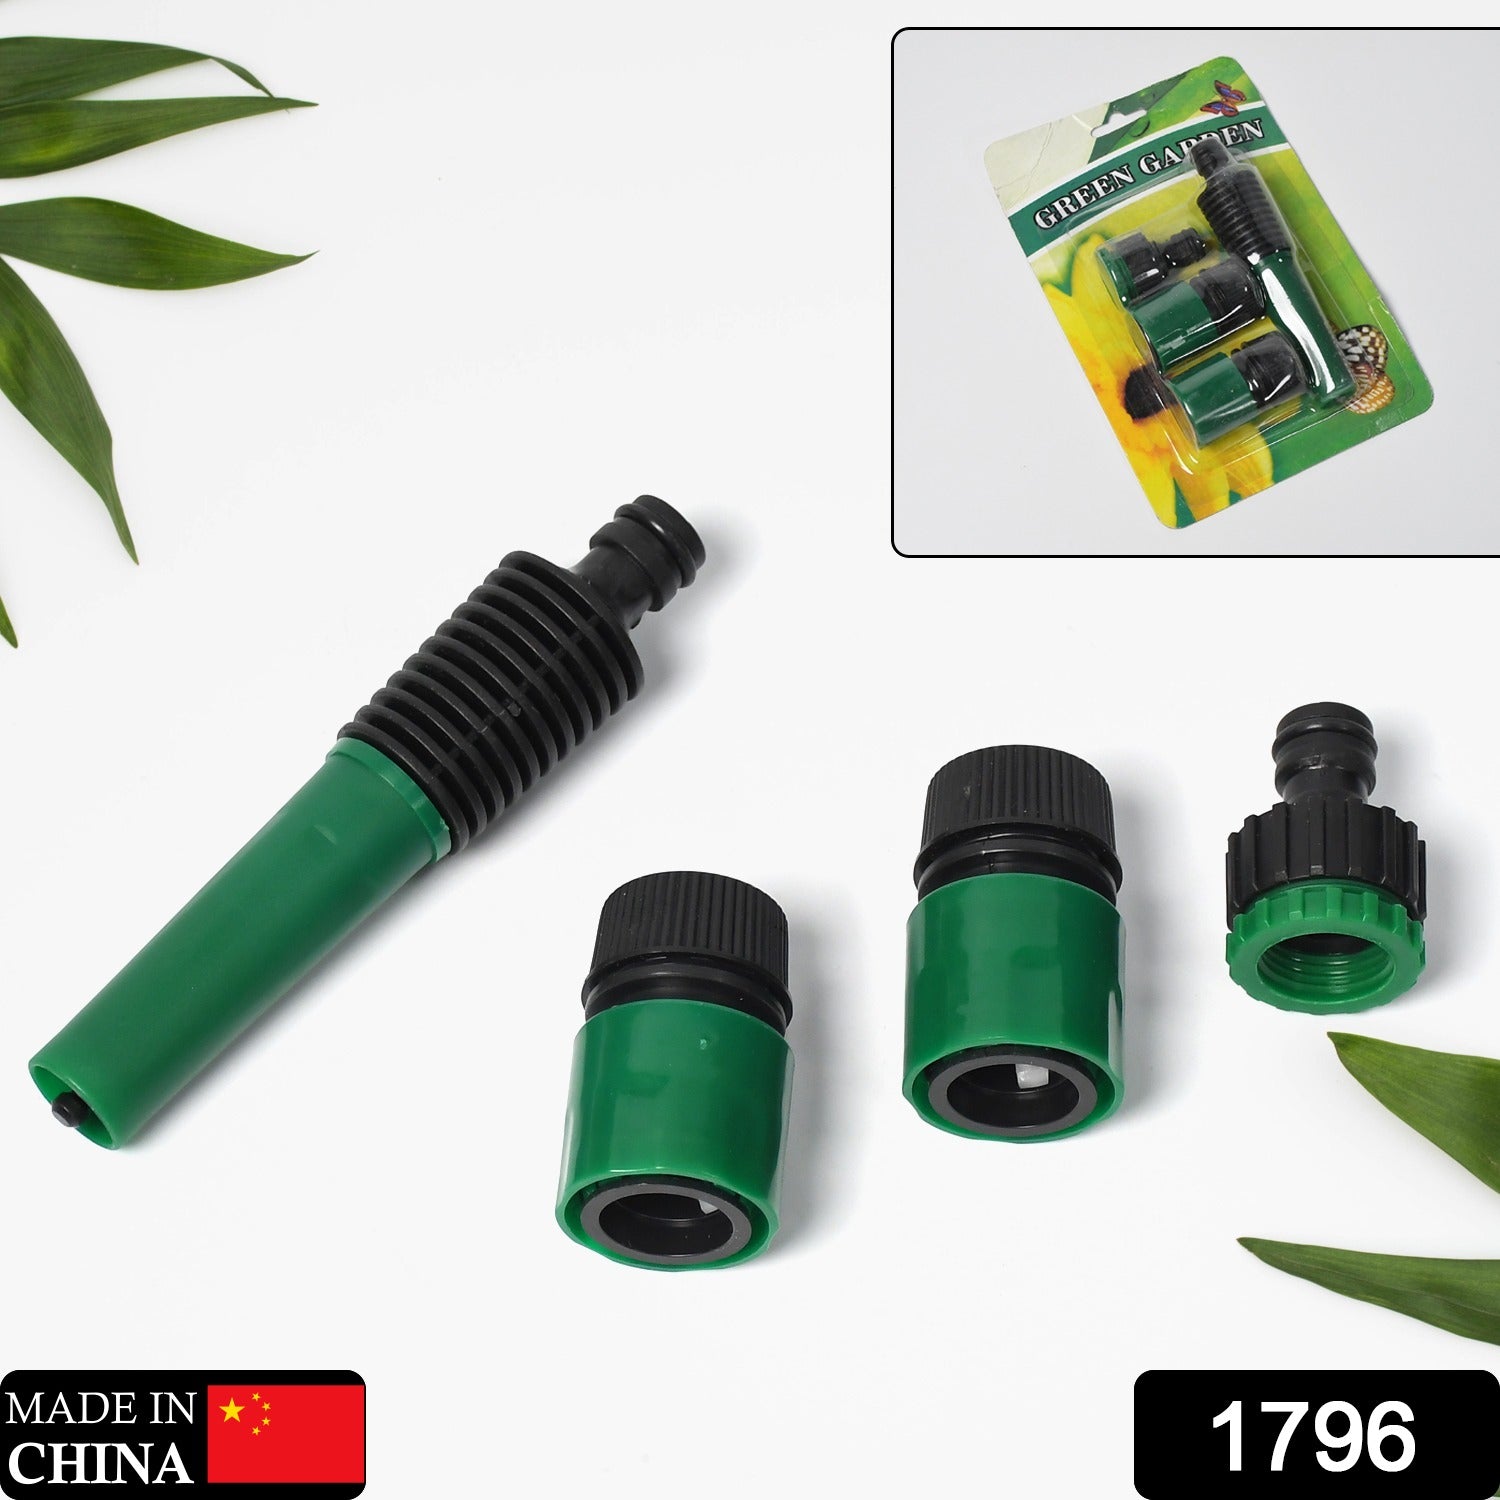 1796 Water Hose Pipe Tap Nozzle Connector Set Fitting Adapter Hose lock Garden Water Hose Pipe Tap Nozzle Dukandaily